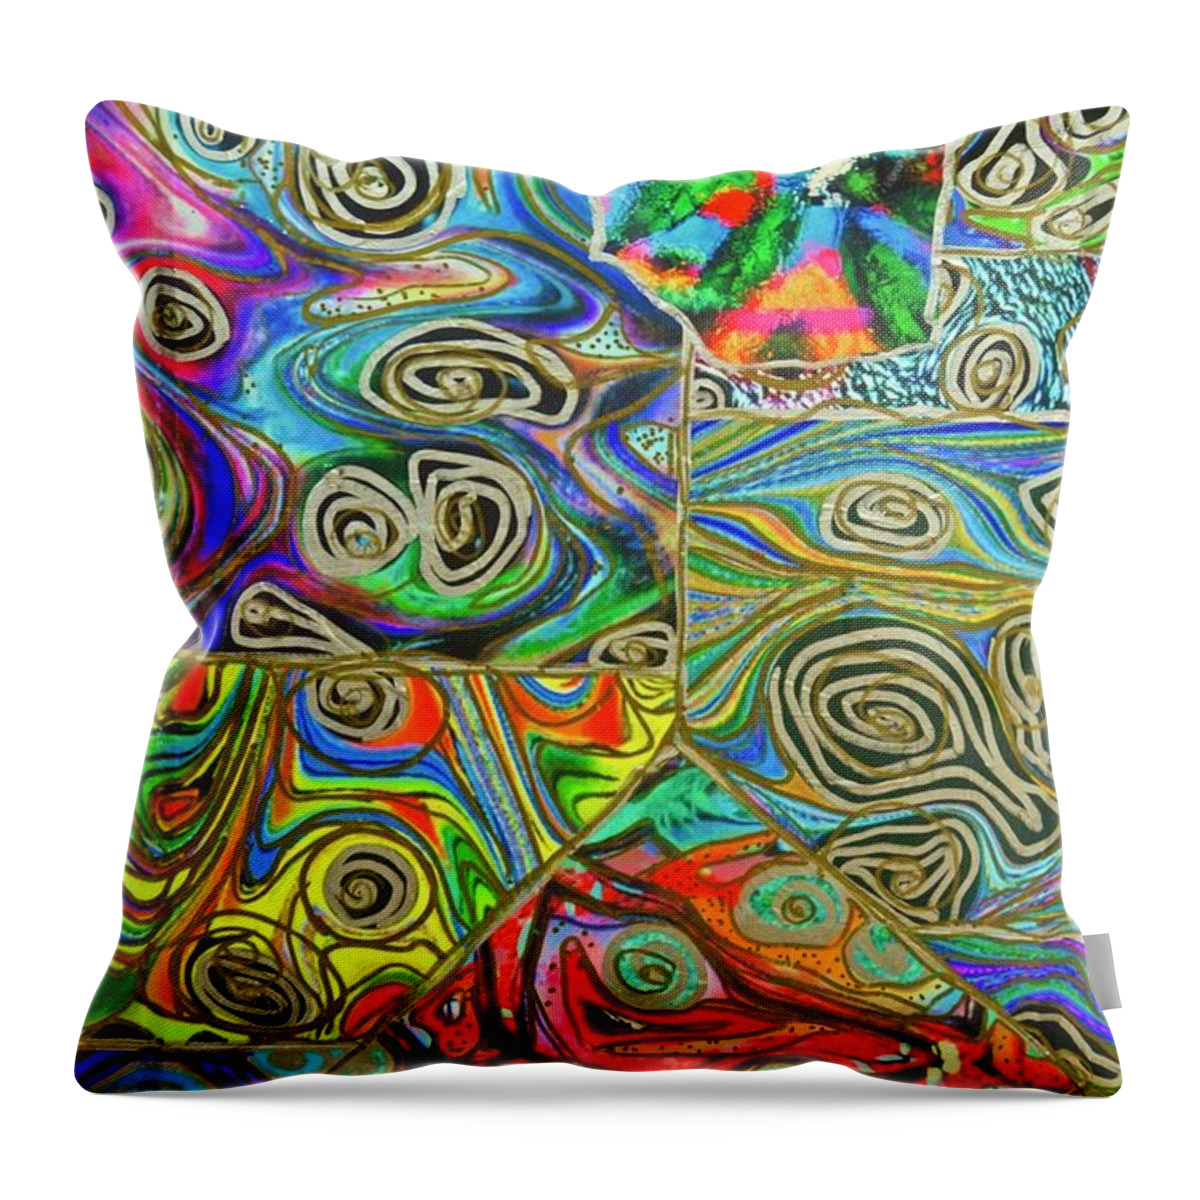 Darts Throw Pillow featuring the mixed media Squiggly Darts With Squiggly Parts by Debra Amerson